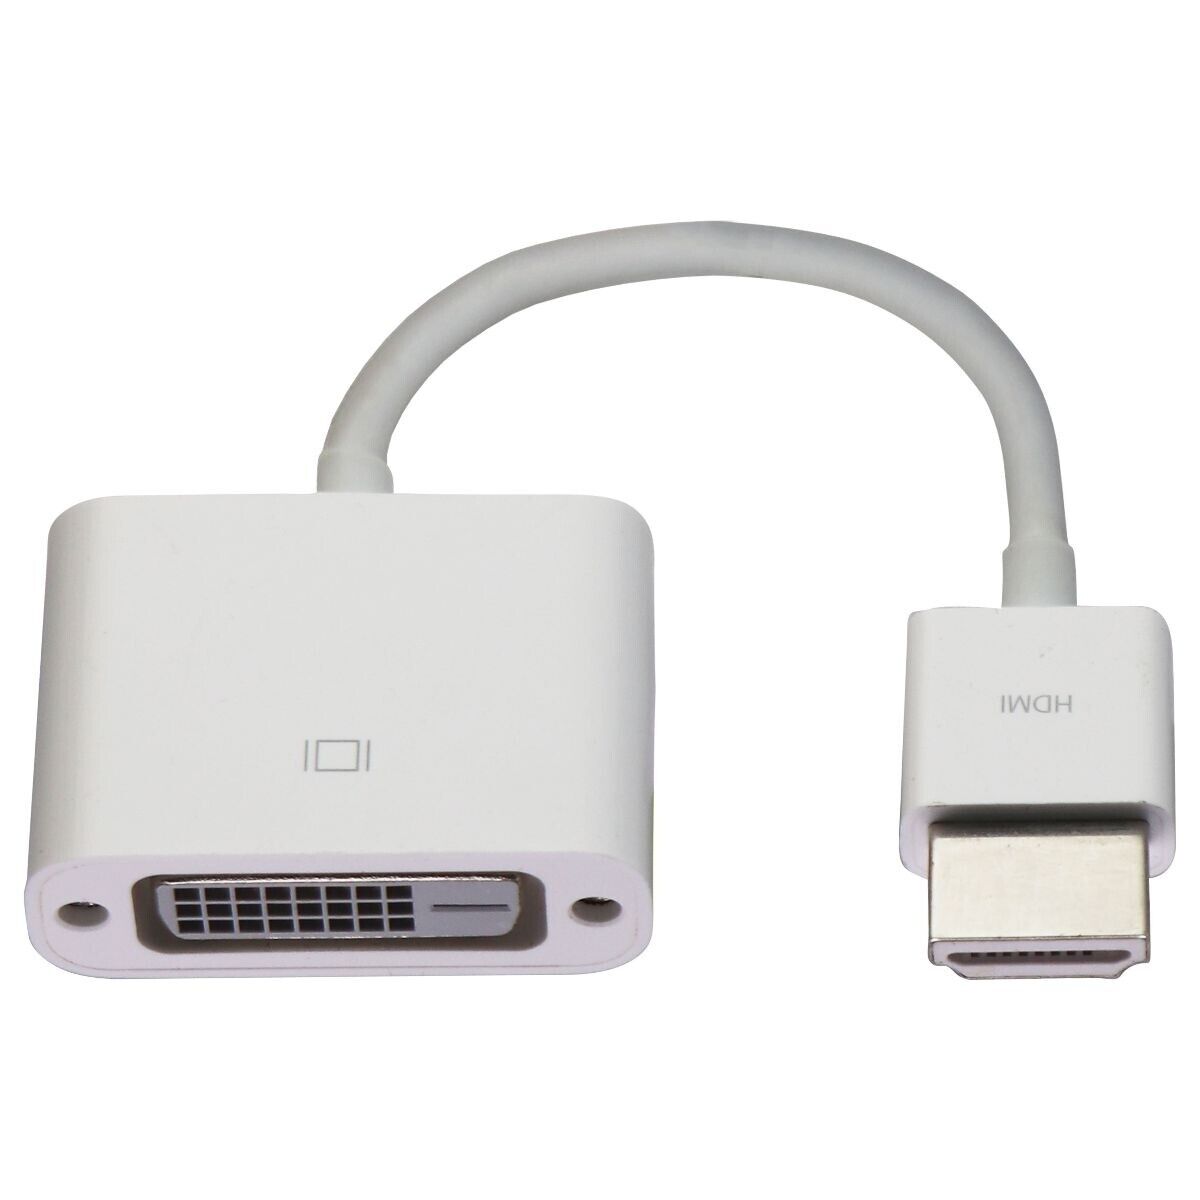 Apple HDMI to DVI Adapter for External Display - White (MJVU2AM/A)